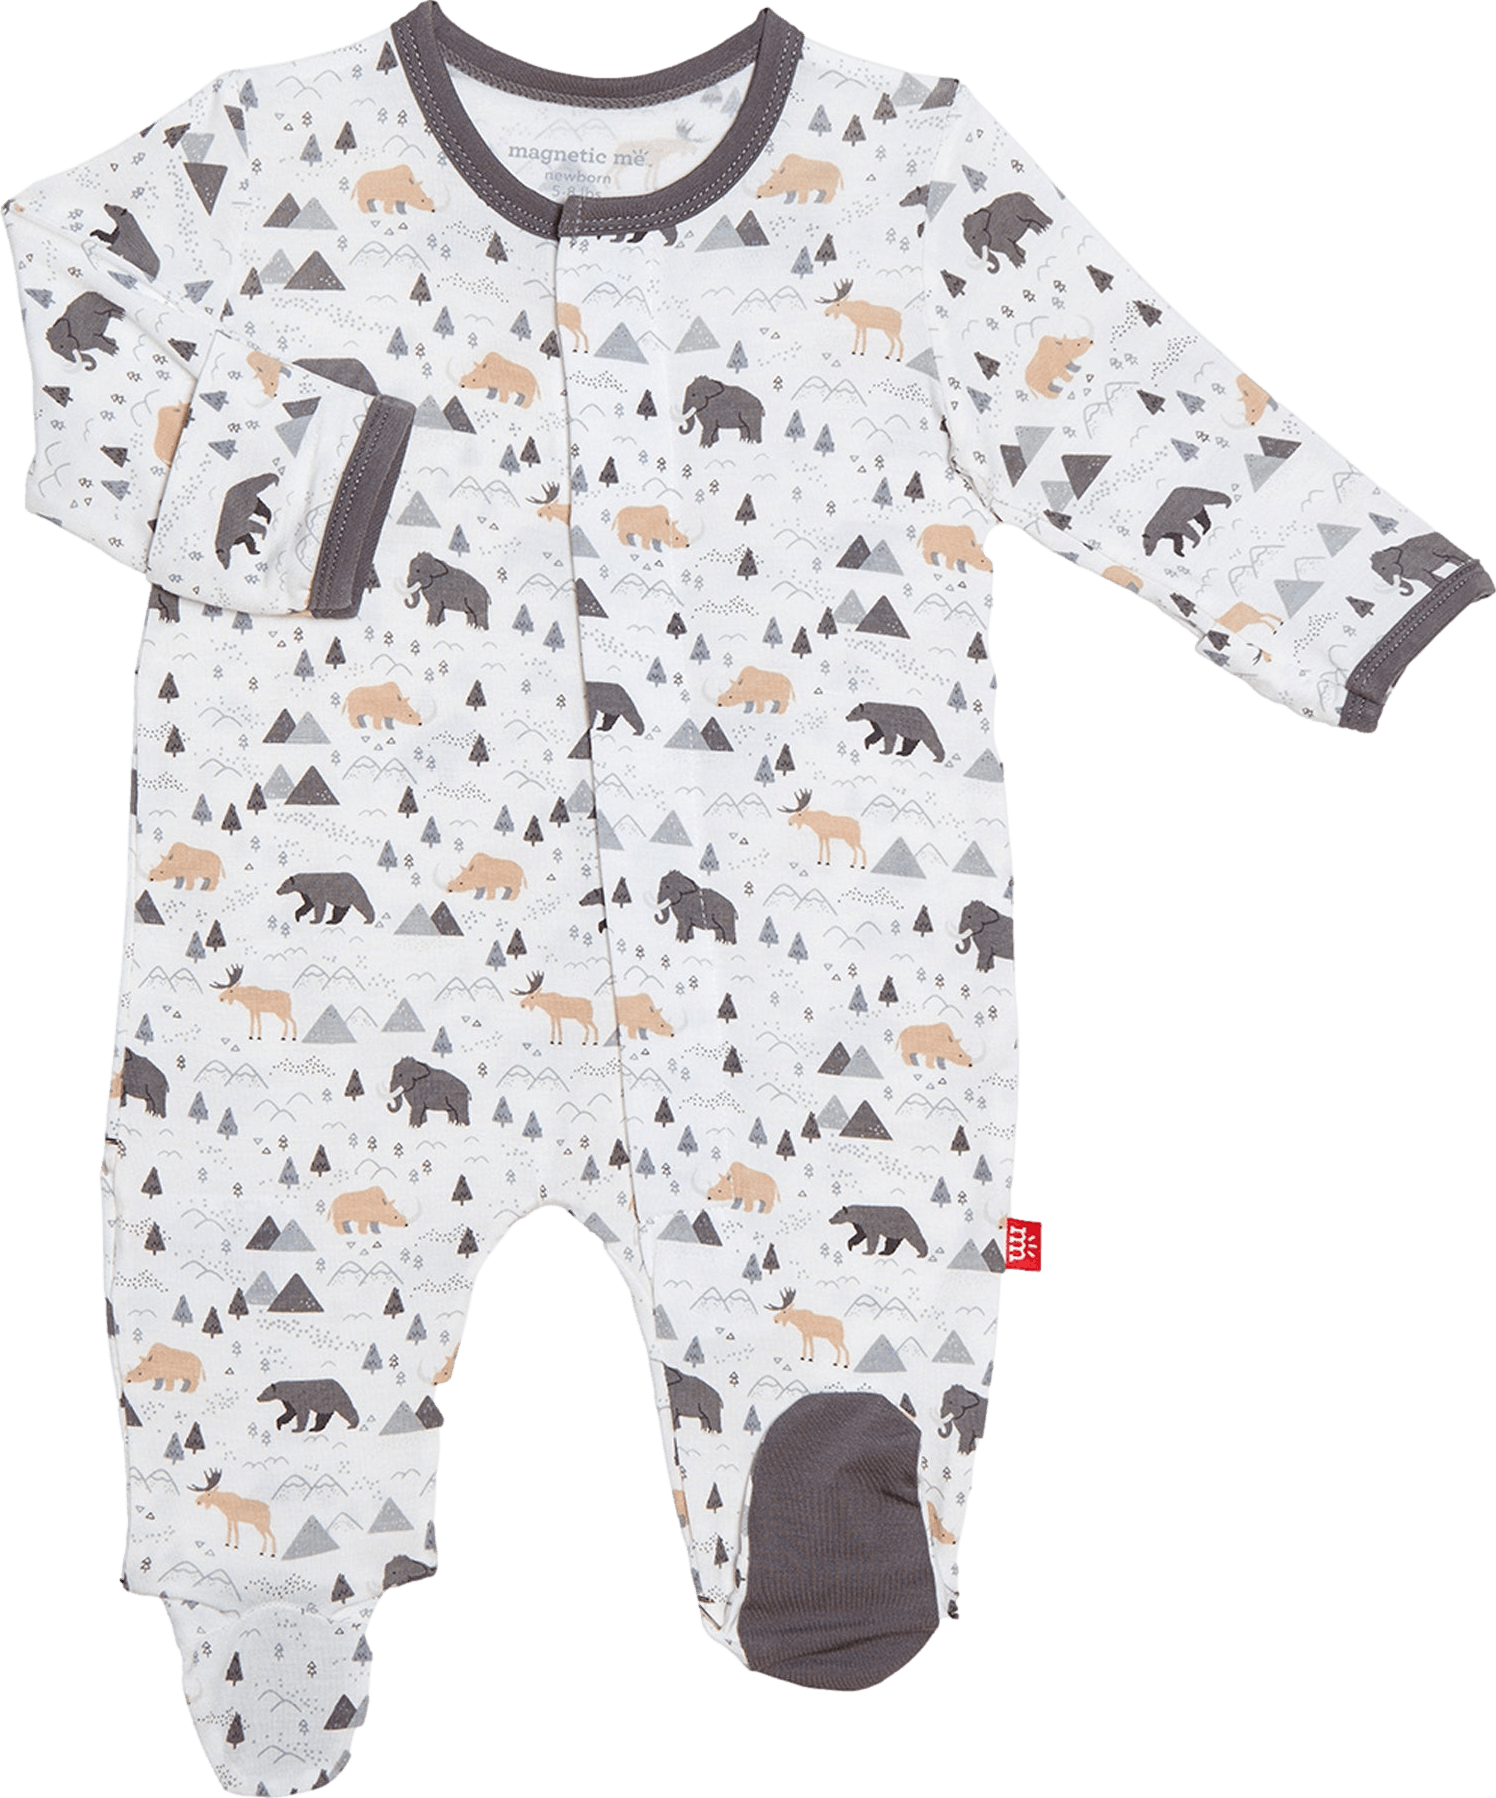 Magnetic Me Modal Footie Tiny Tundra Print · 0-3 months